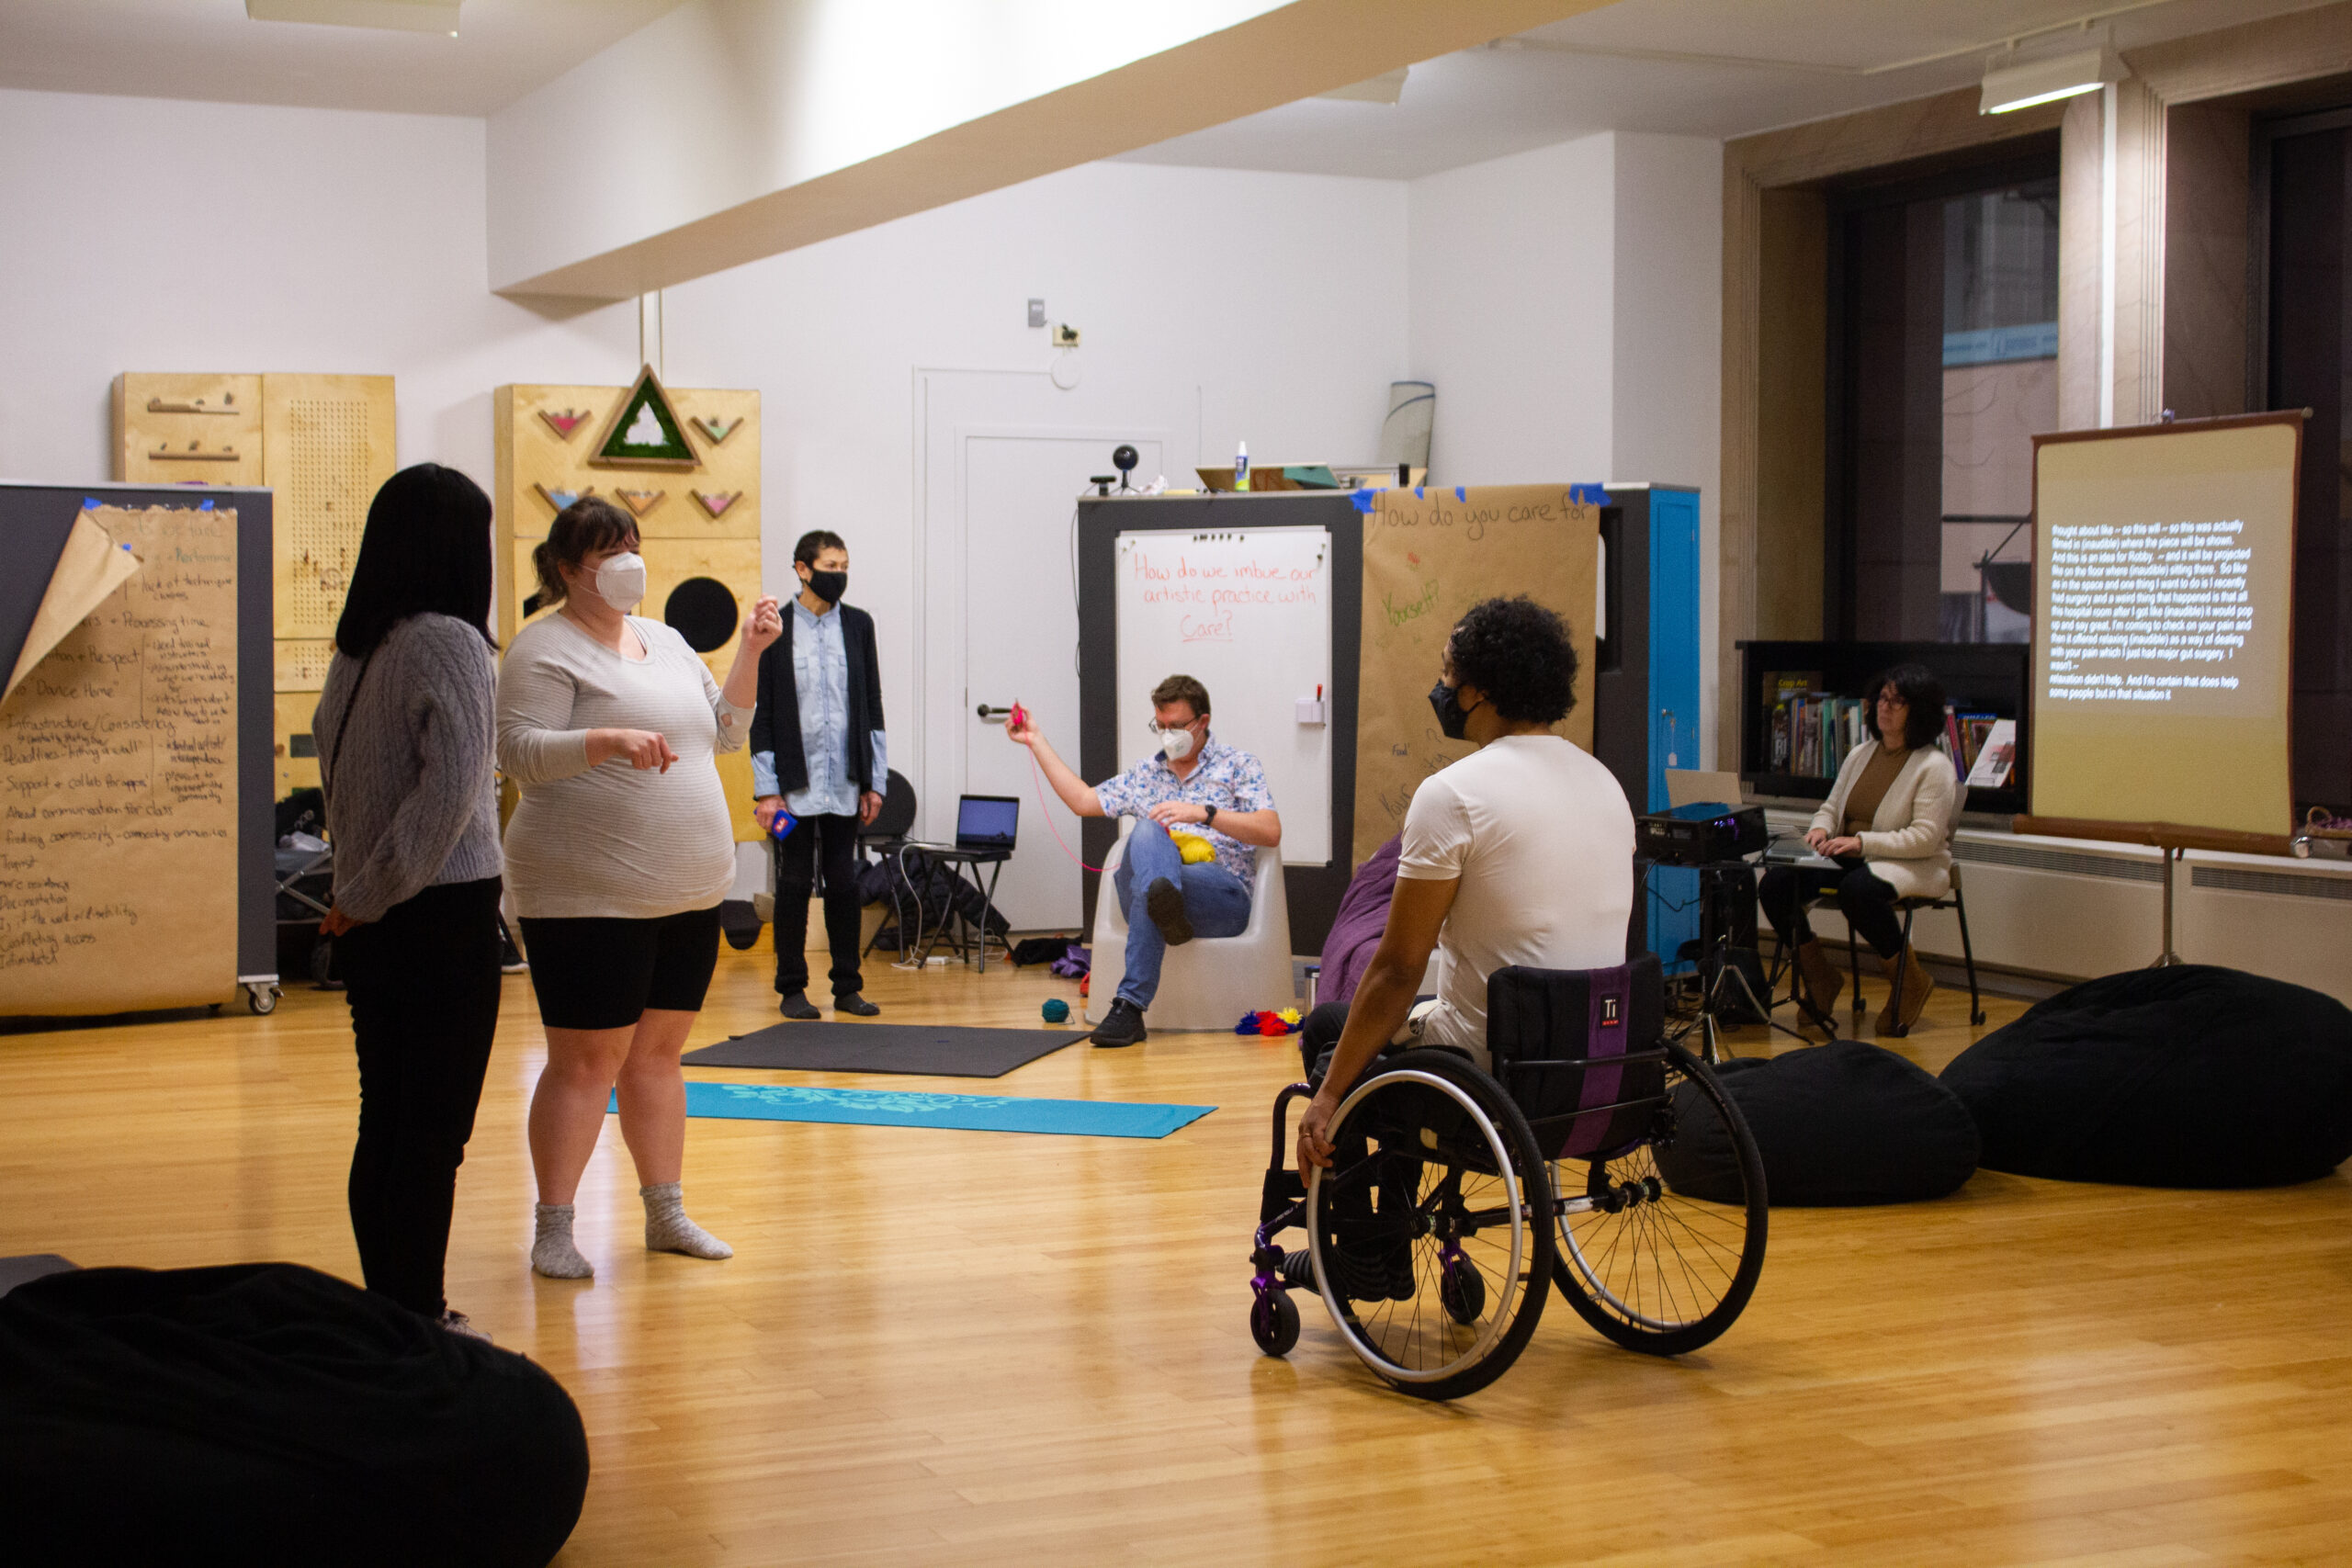 A group of disabled dancers in masks convene in an indoor space with wood floors.